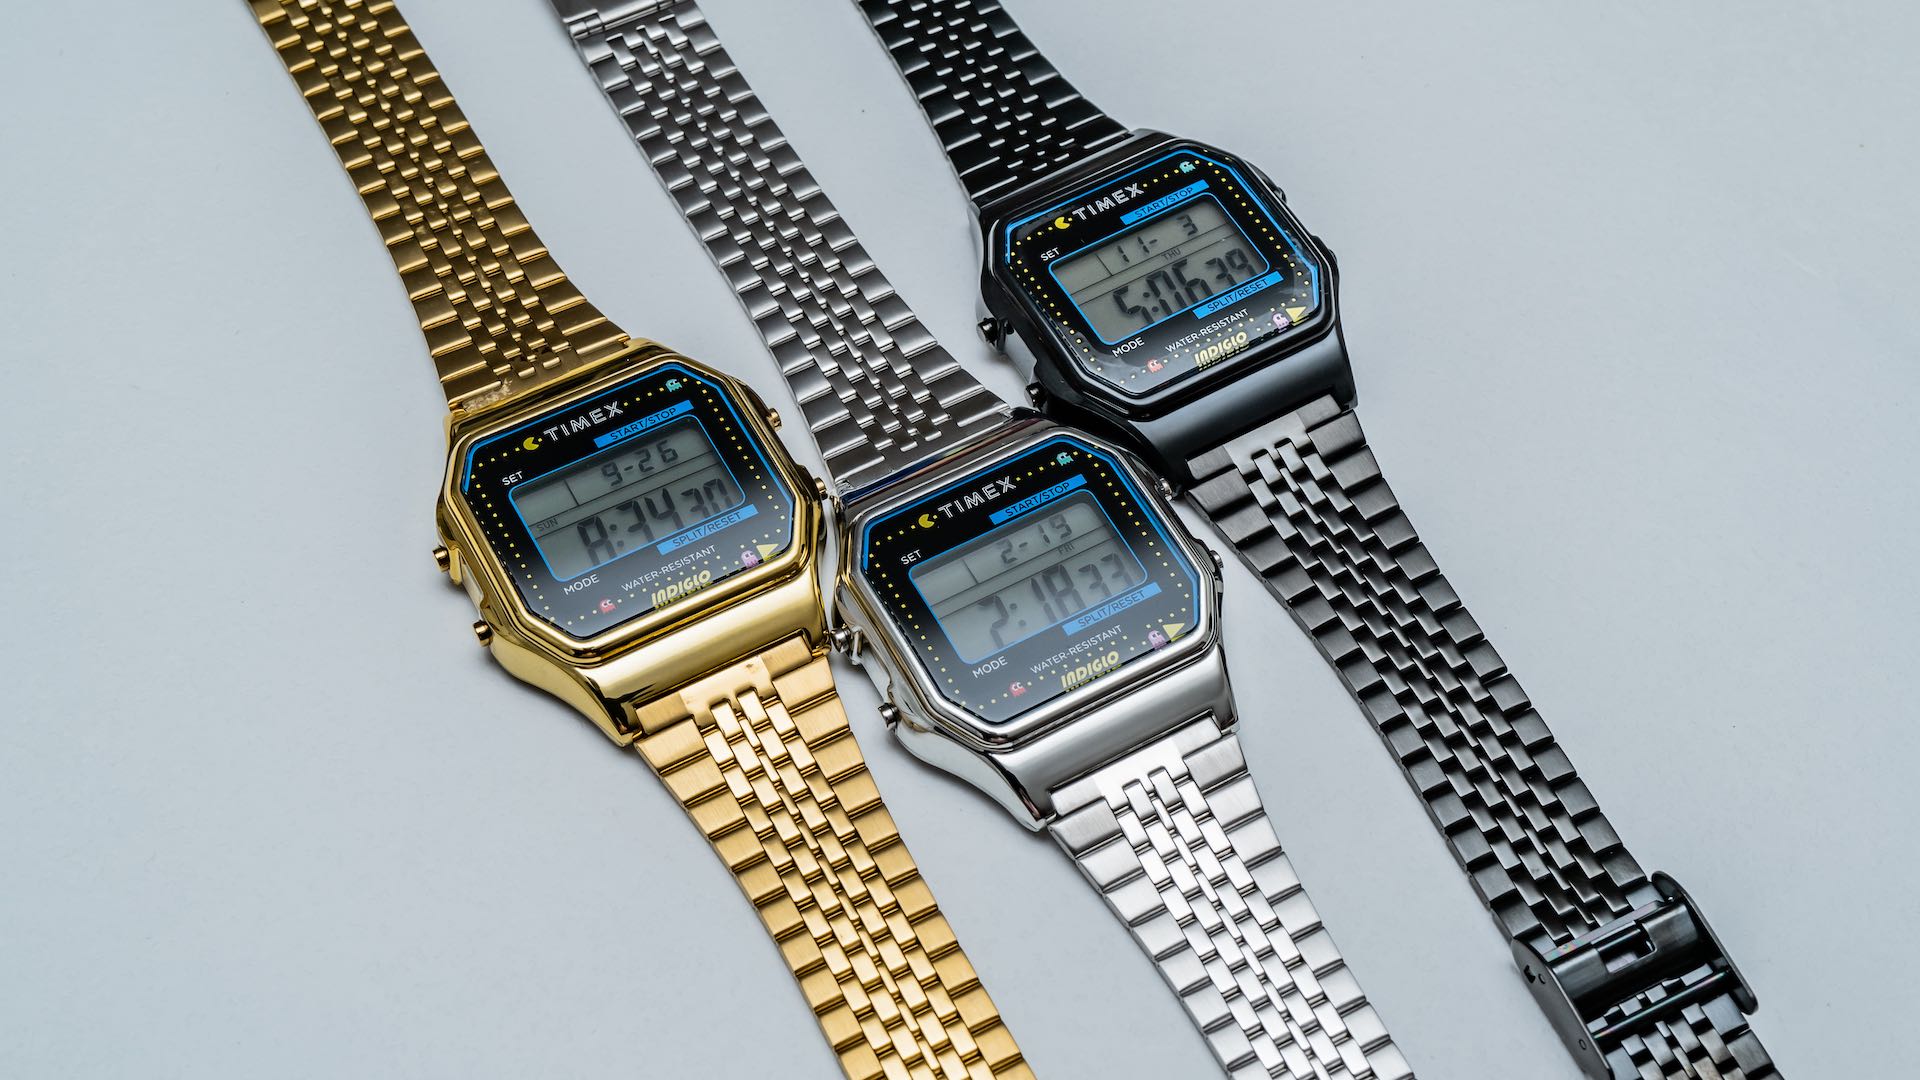 Hands-On: Timex T80 X PAC-MAN Watch